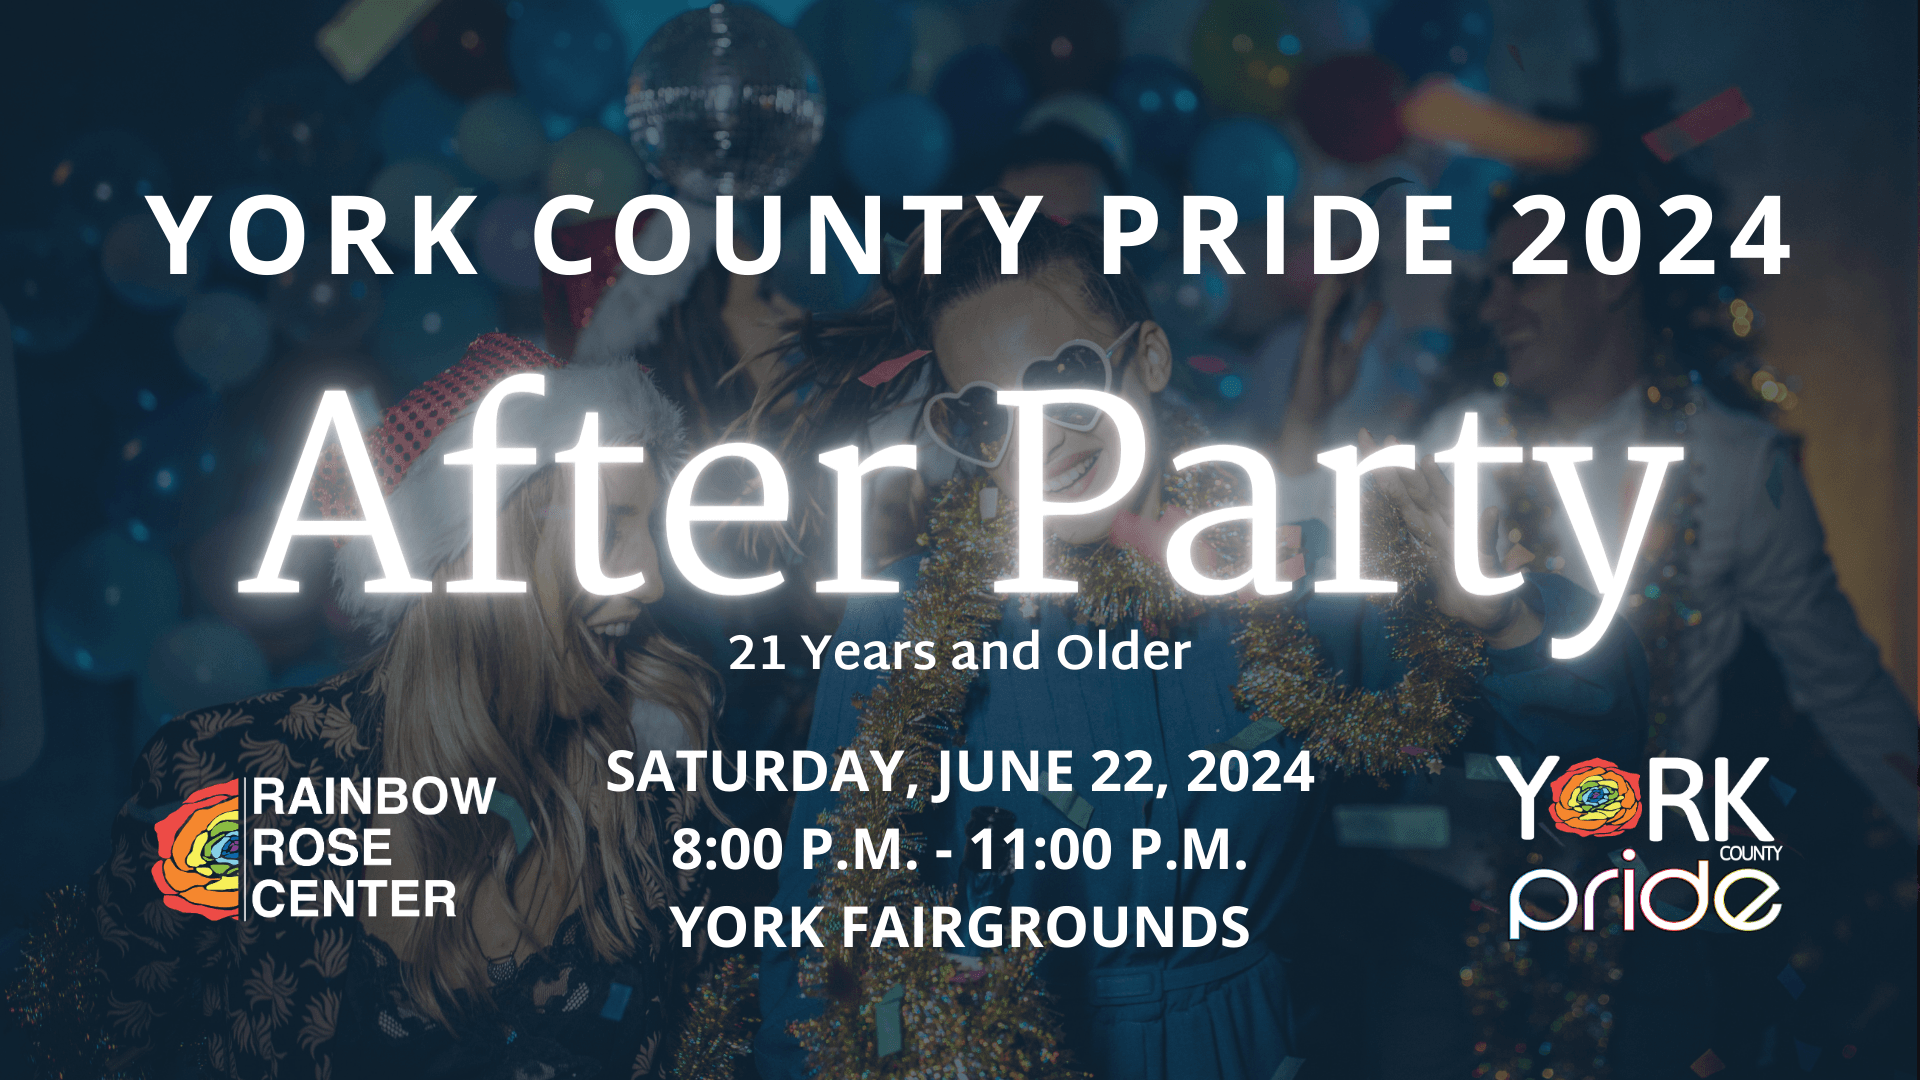 York County Pride 2024 After Party